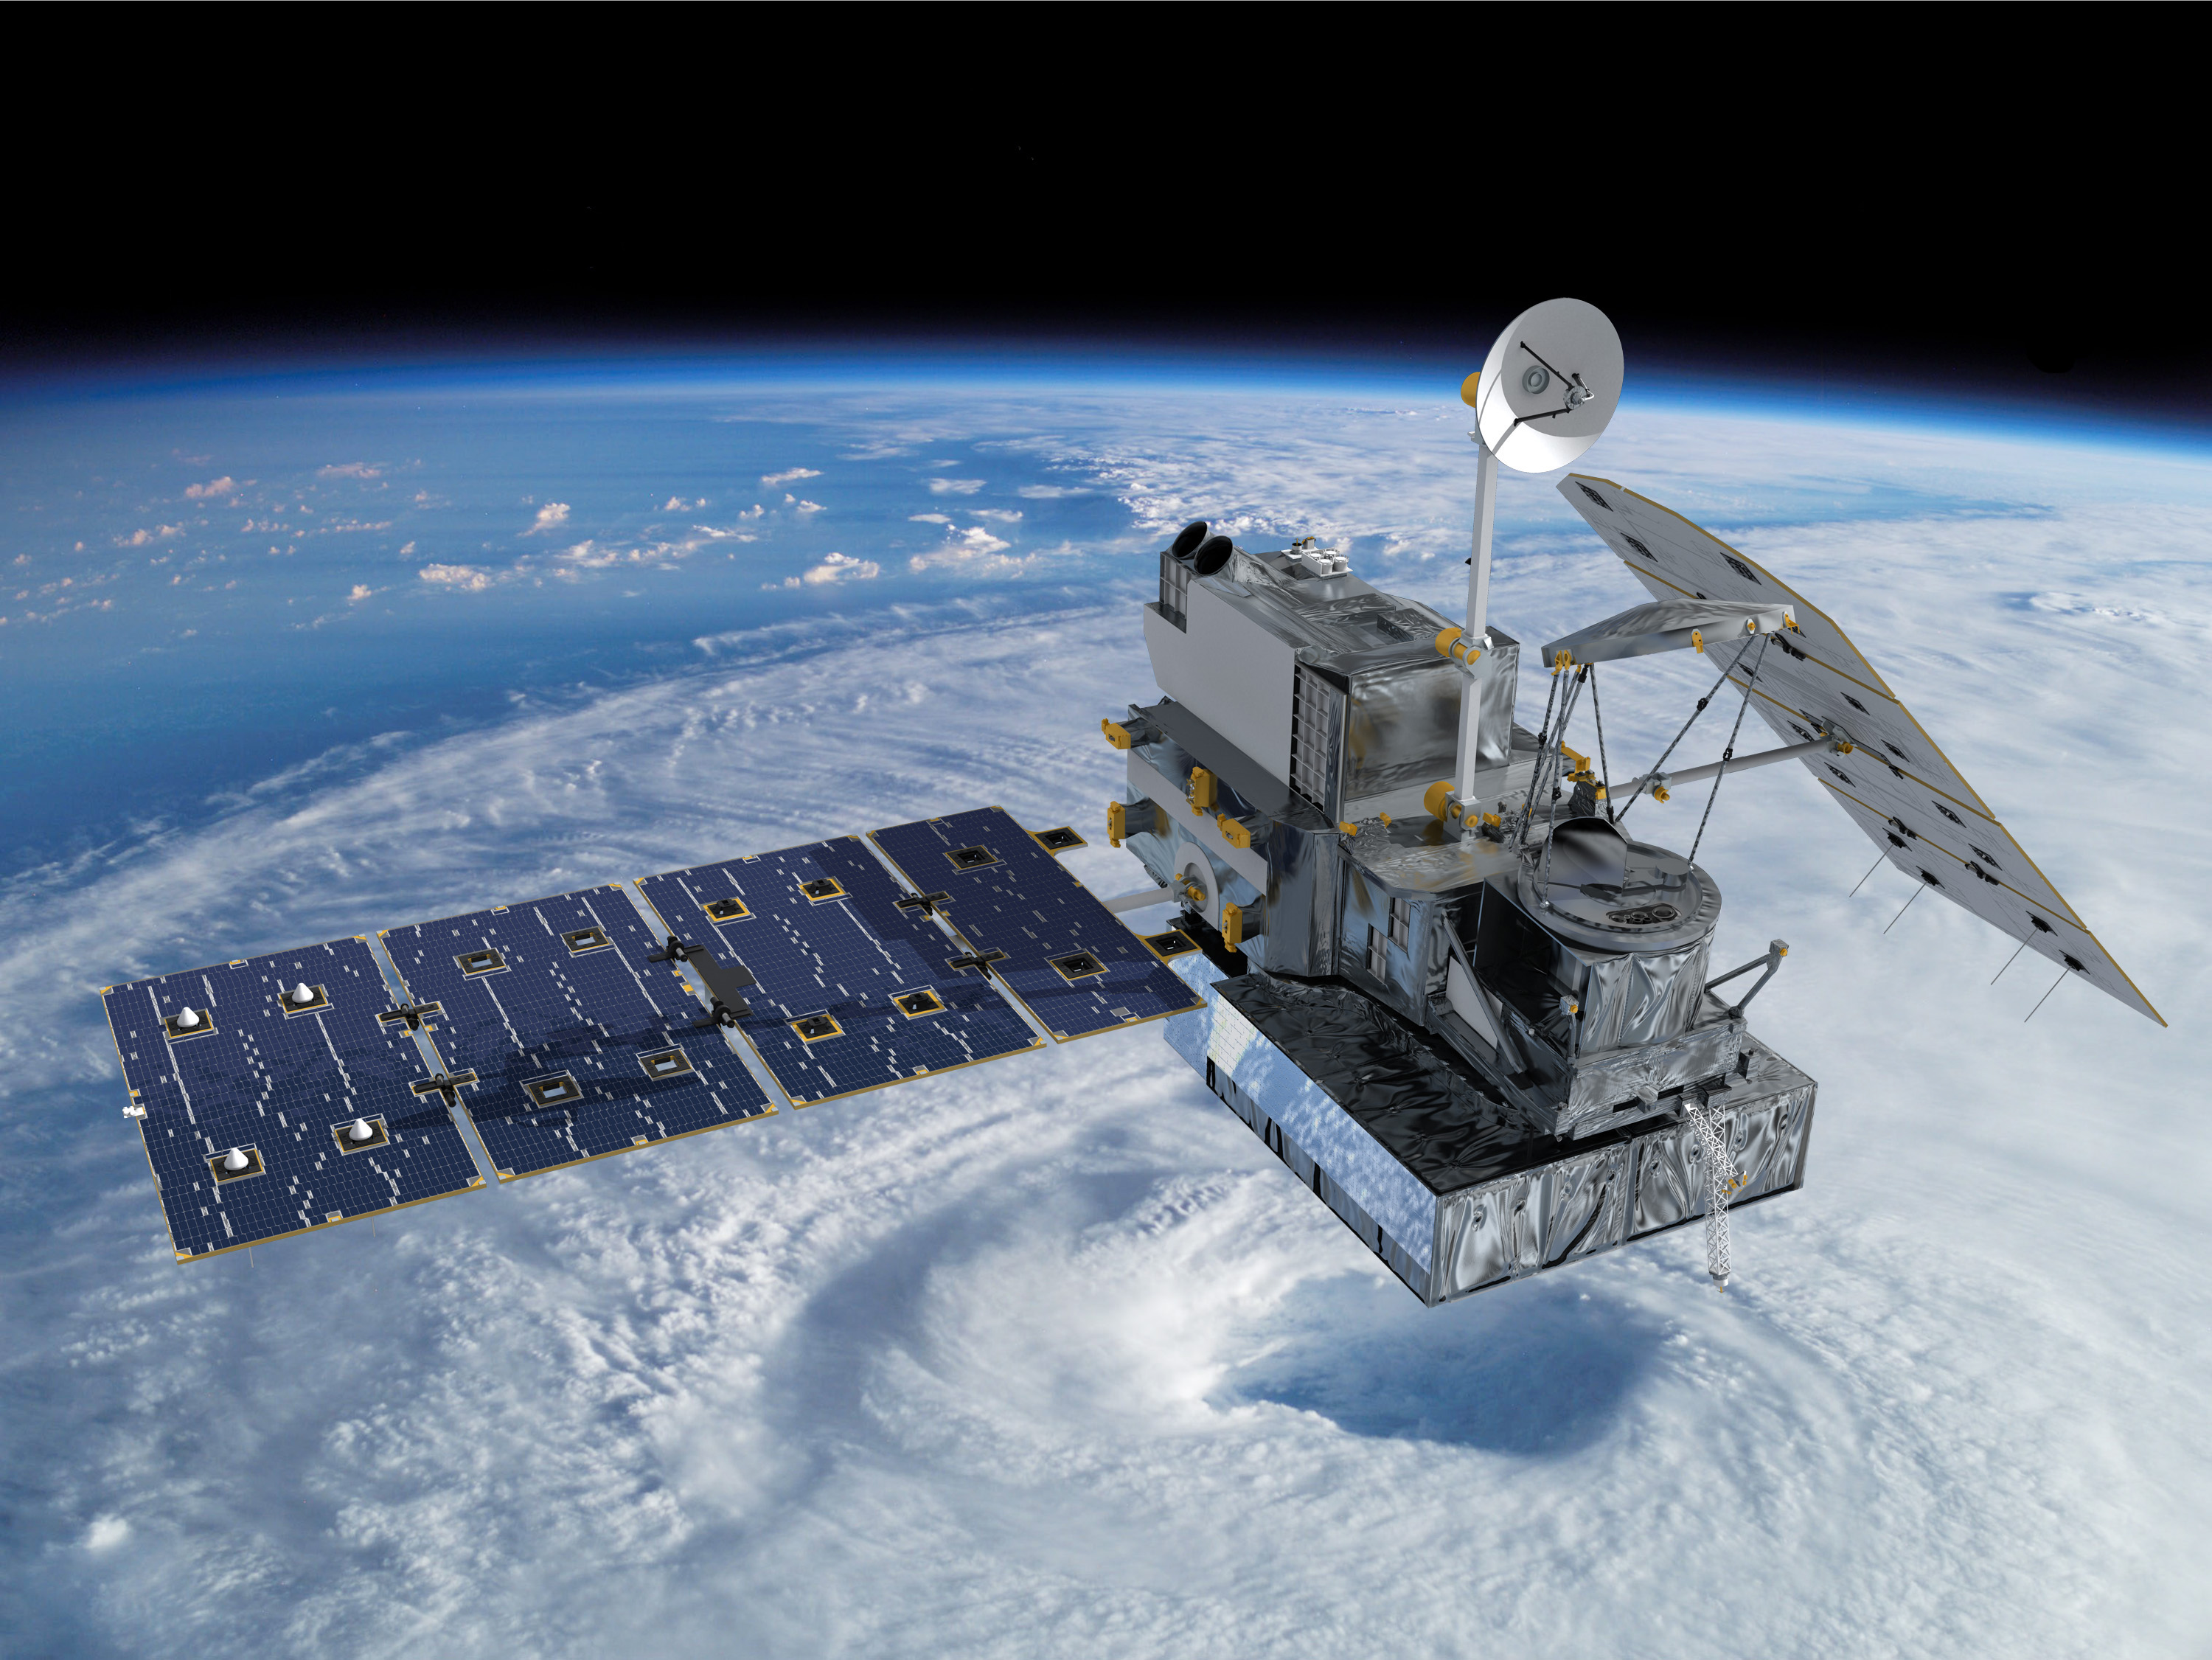 Earth-observing satellites like the Global Precipitation Measurement Core Observatory provide the data needed for Conservation International’s wildfire detection system. Credit: NASA